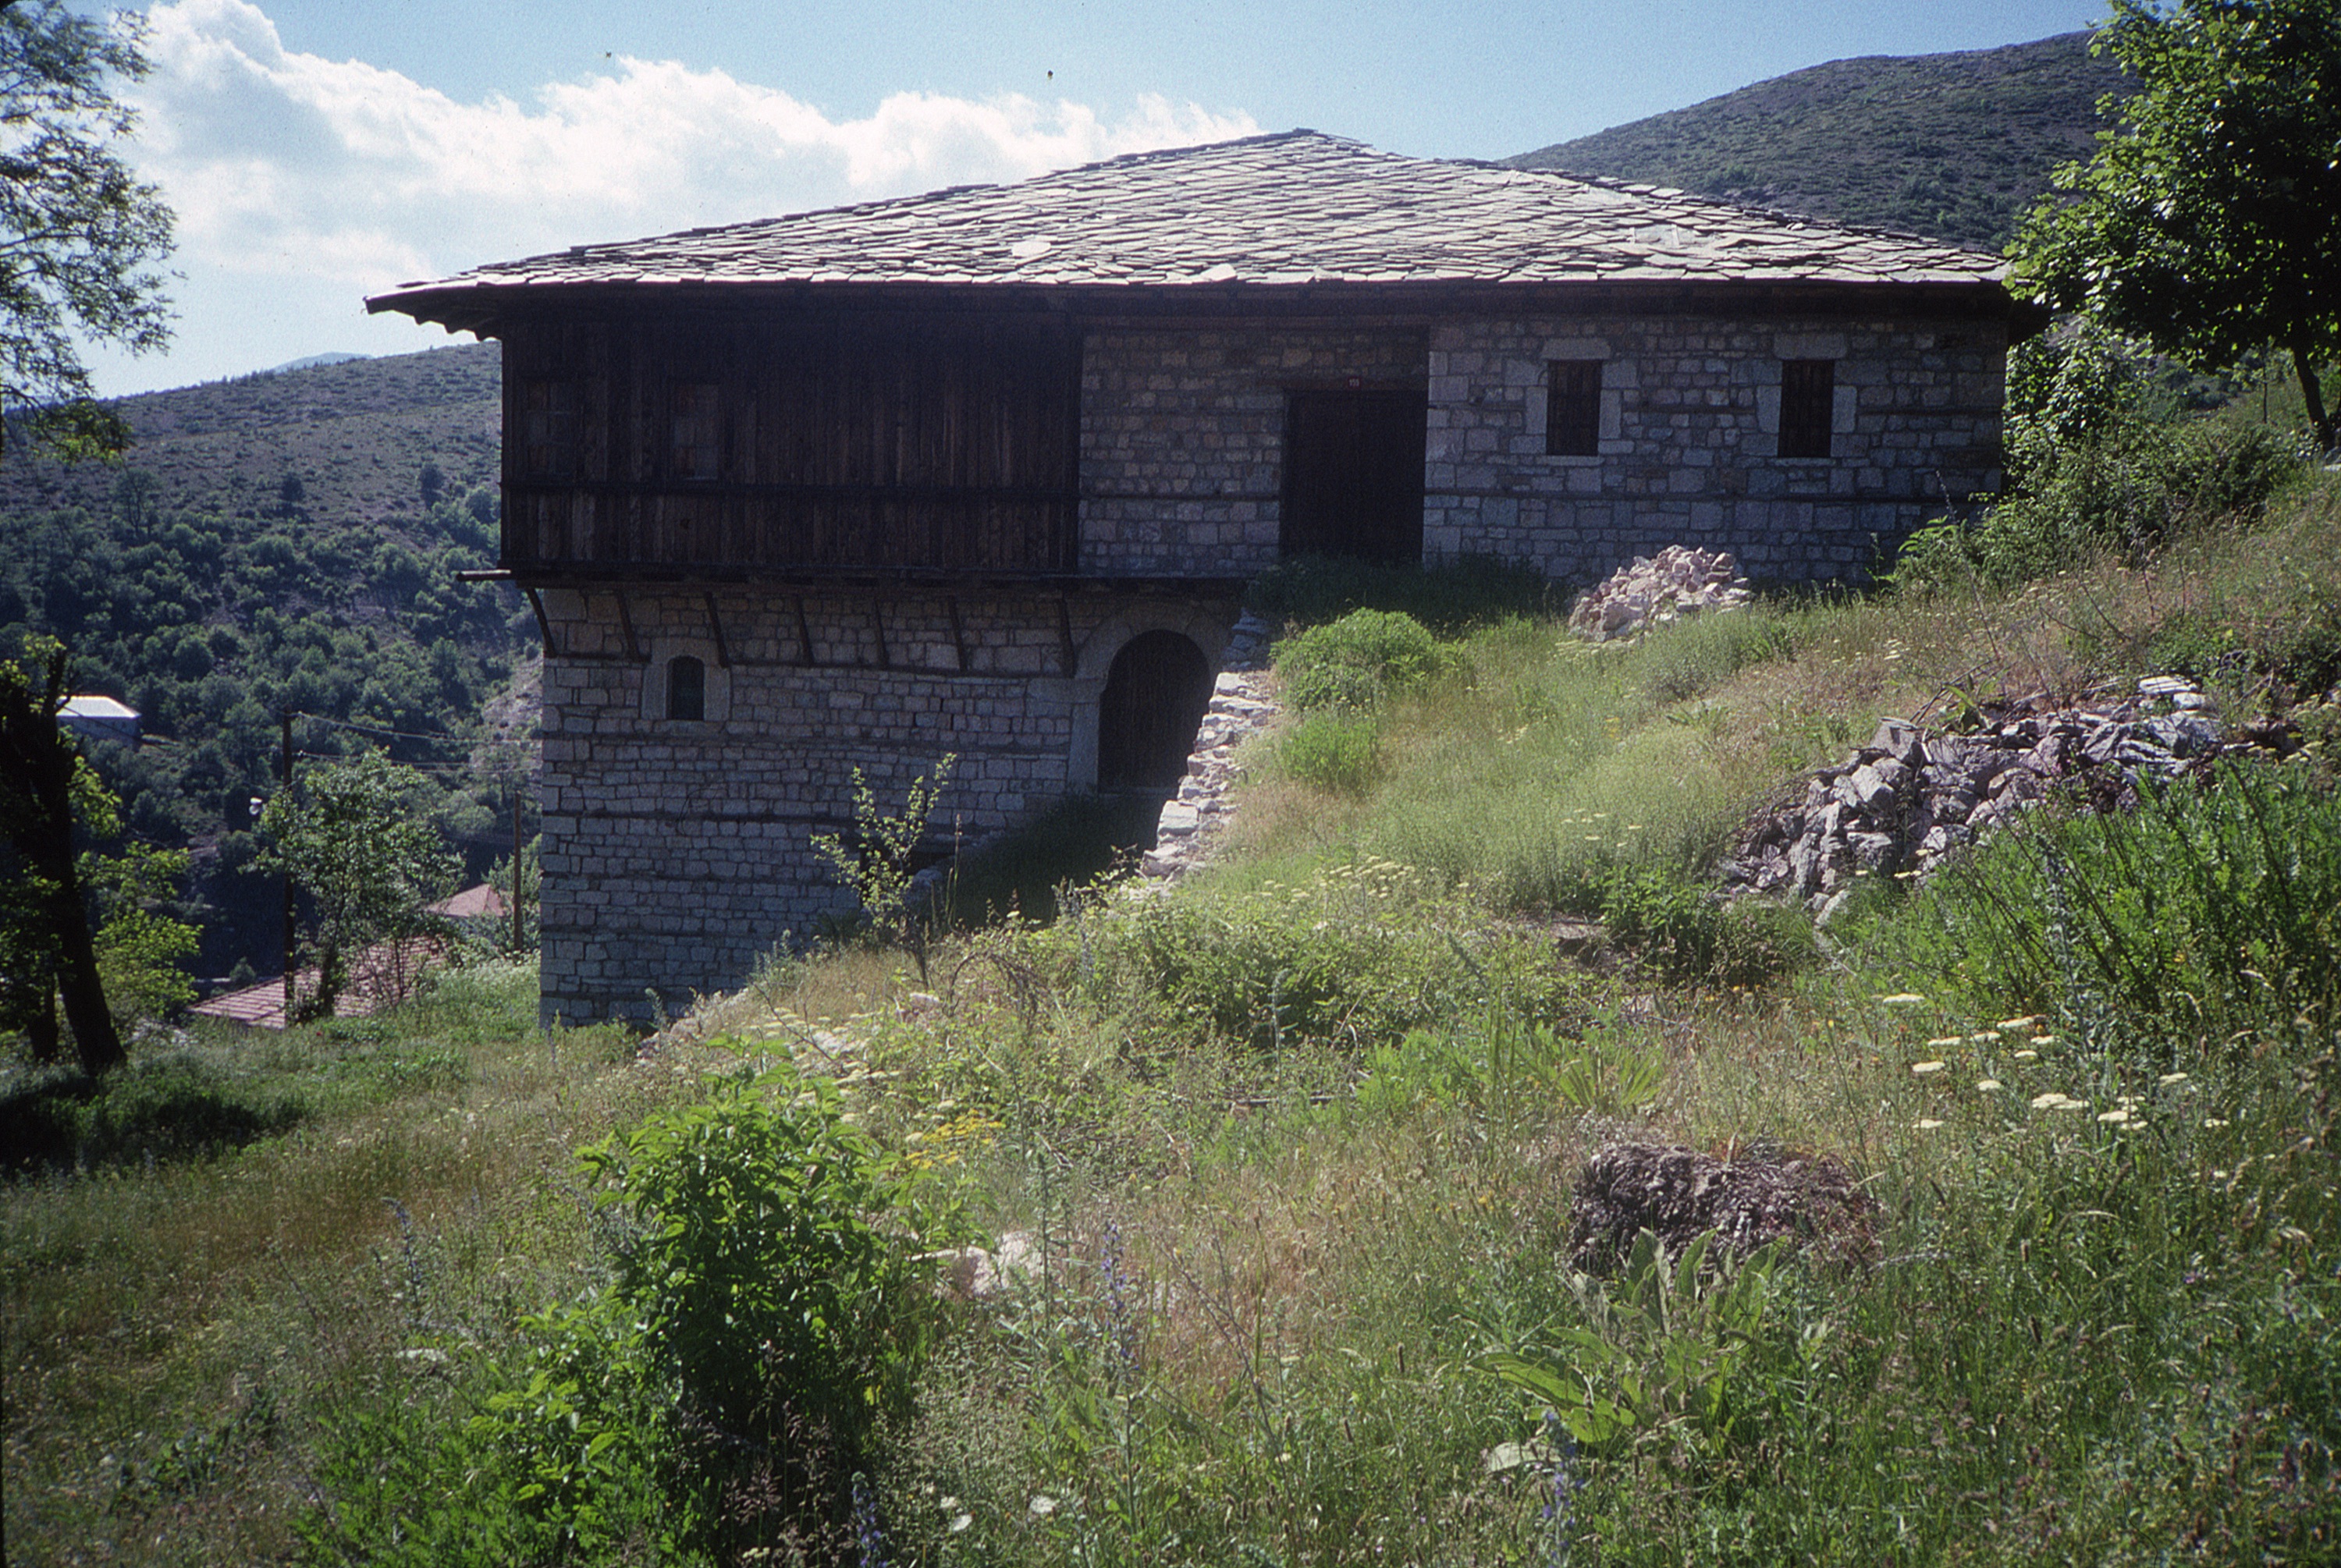 <p>This three storey dwelling previously belonged to the Tomoski family. The roof has the traditional stone panels (ploča) and masonry walls with wooden reinforcing strips. The reinforced masonry is an important element in Macedonia since seismic activity is common. The projecting corner čardak has additional brackets to support this element. The structure has become a house museum.</p>